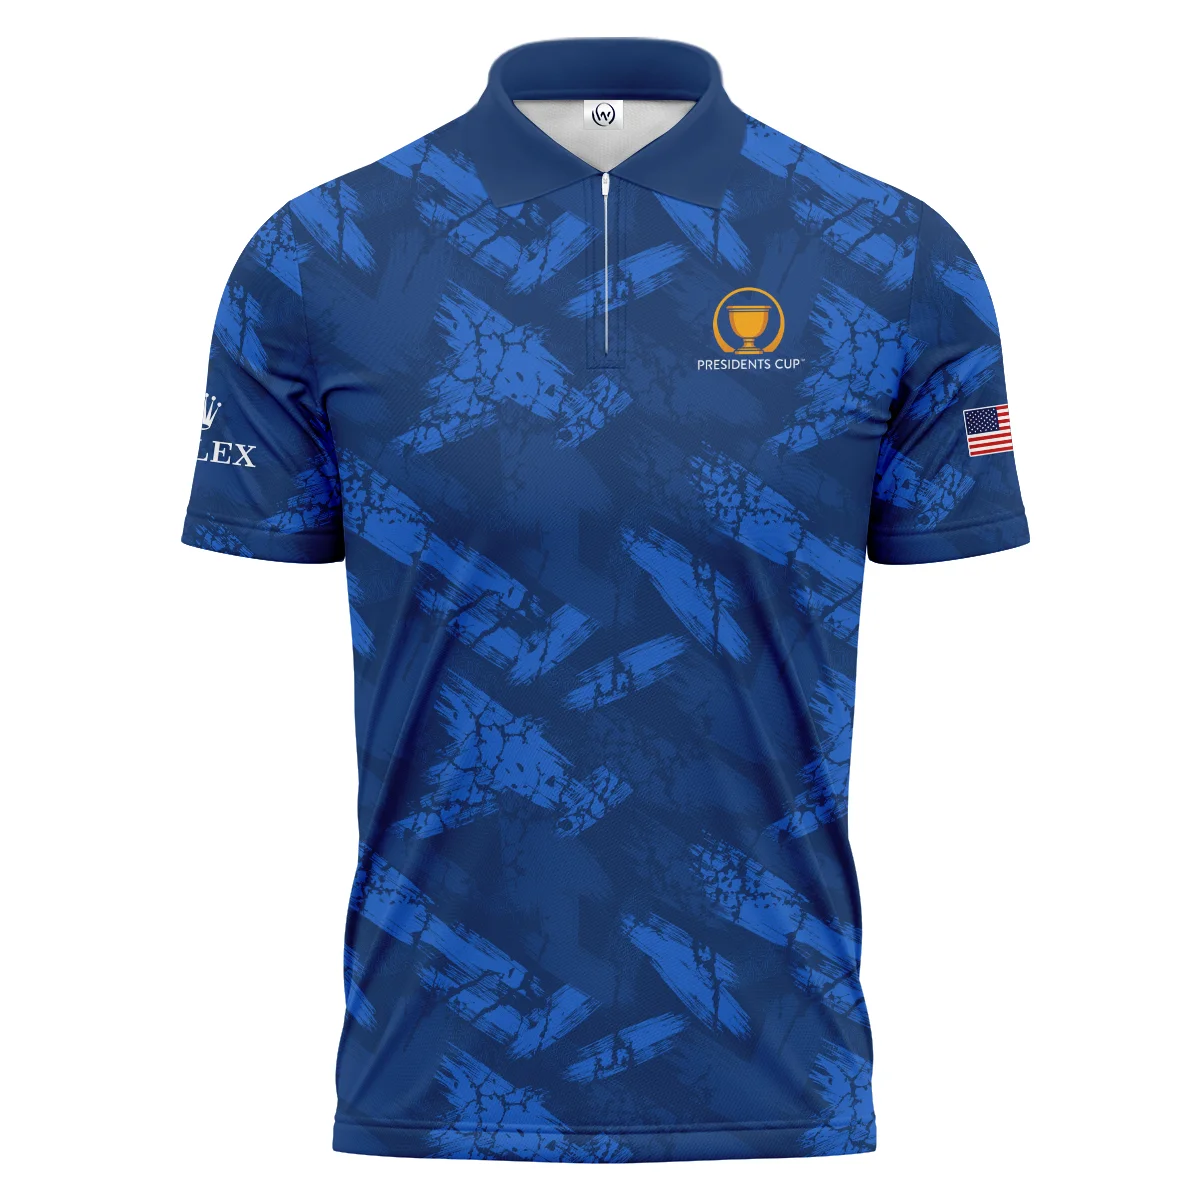 Golf Dark Blue With Grunge Pattern Presidents Cup Rolex Vneck Polo Shirt All Over Prints  HOPDC210624A01ROXZVPL